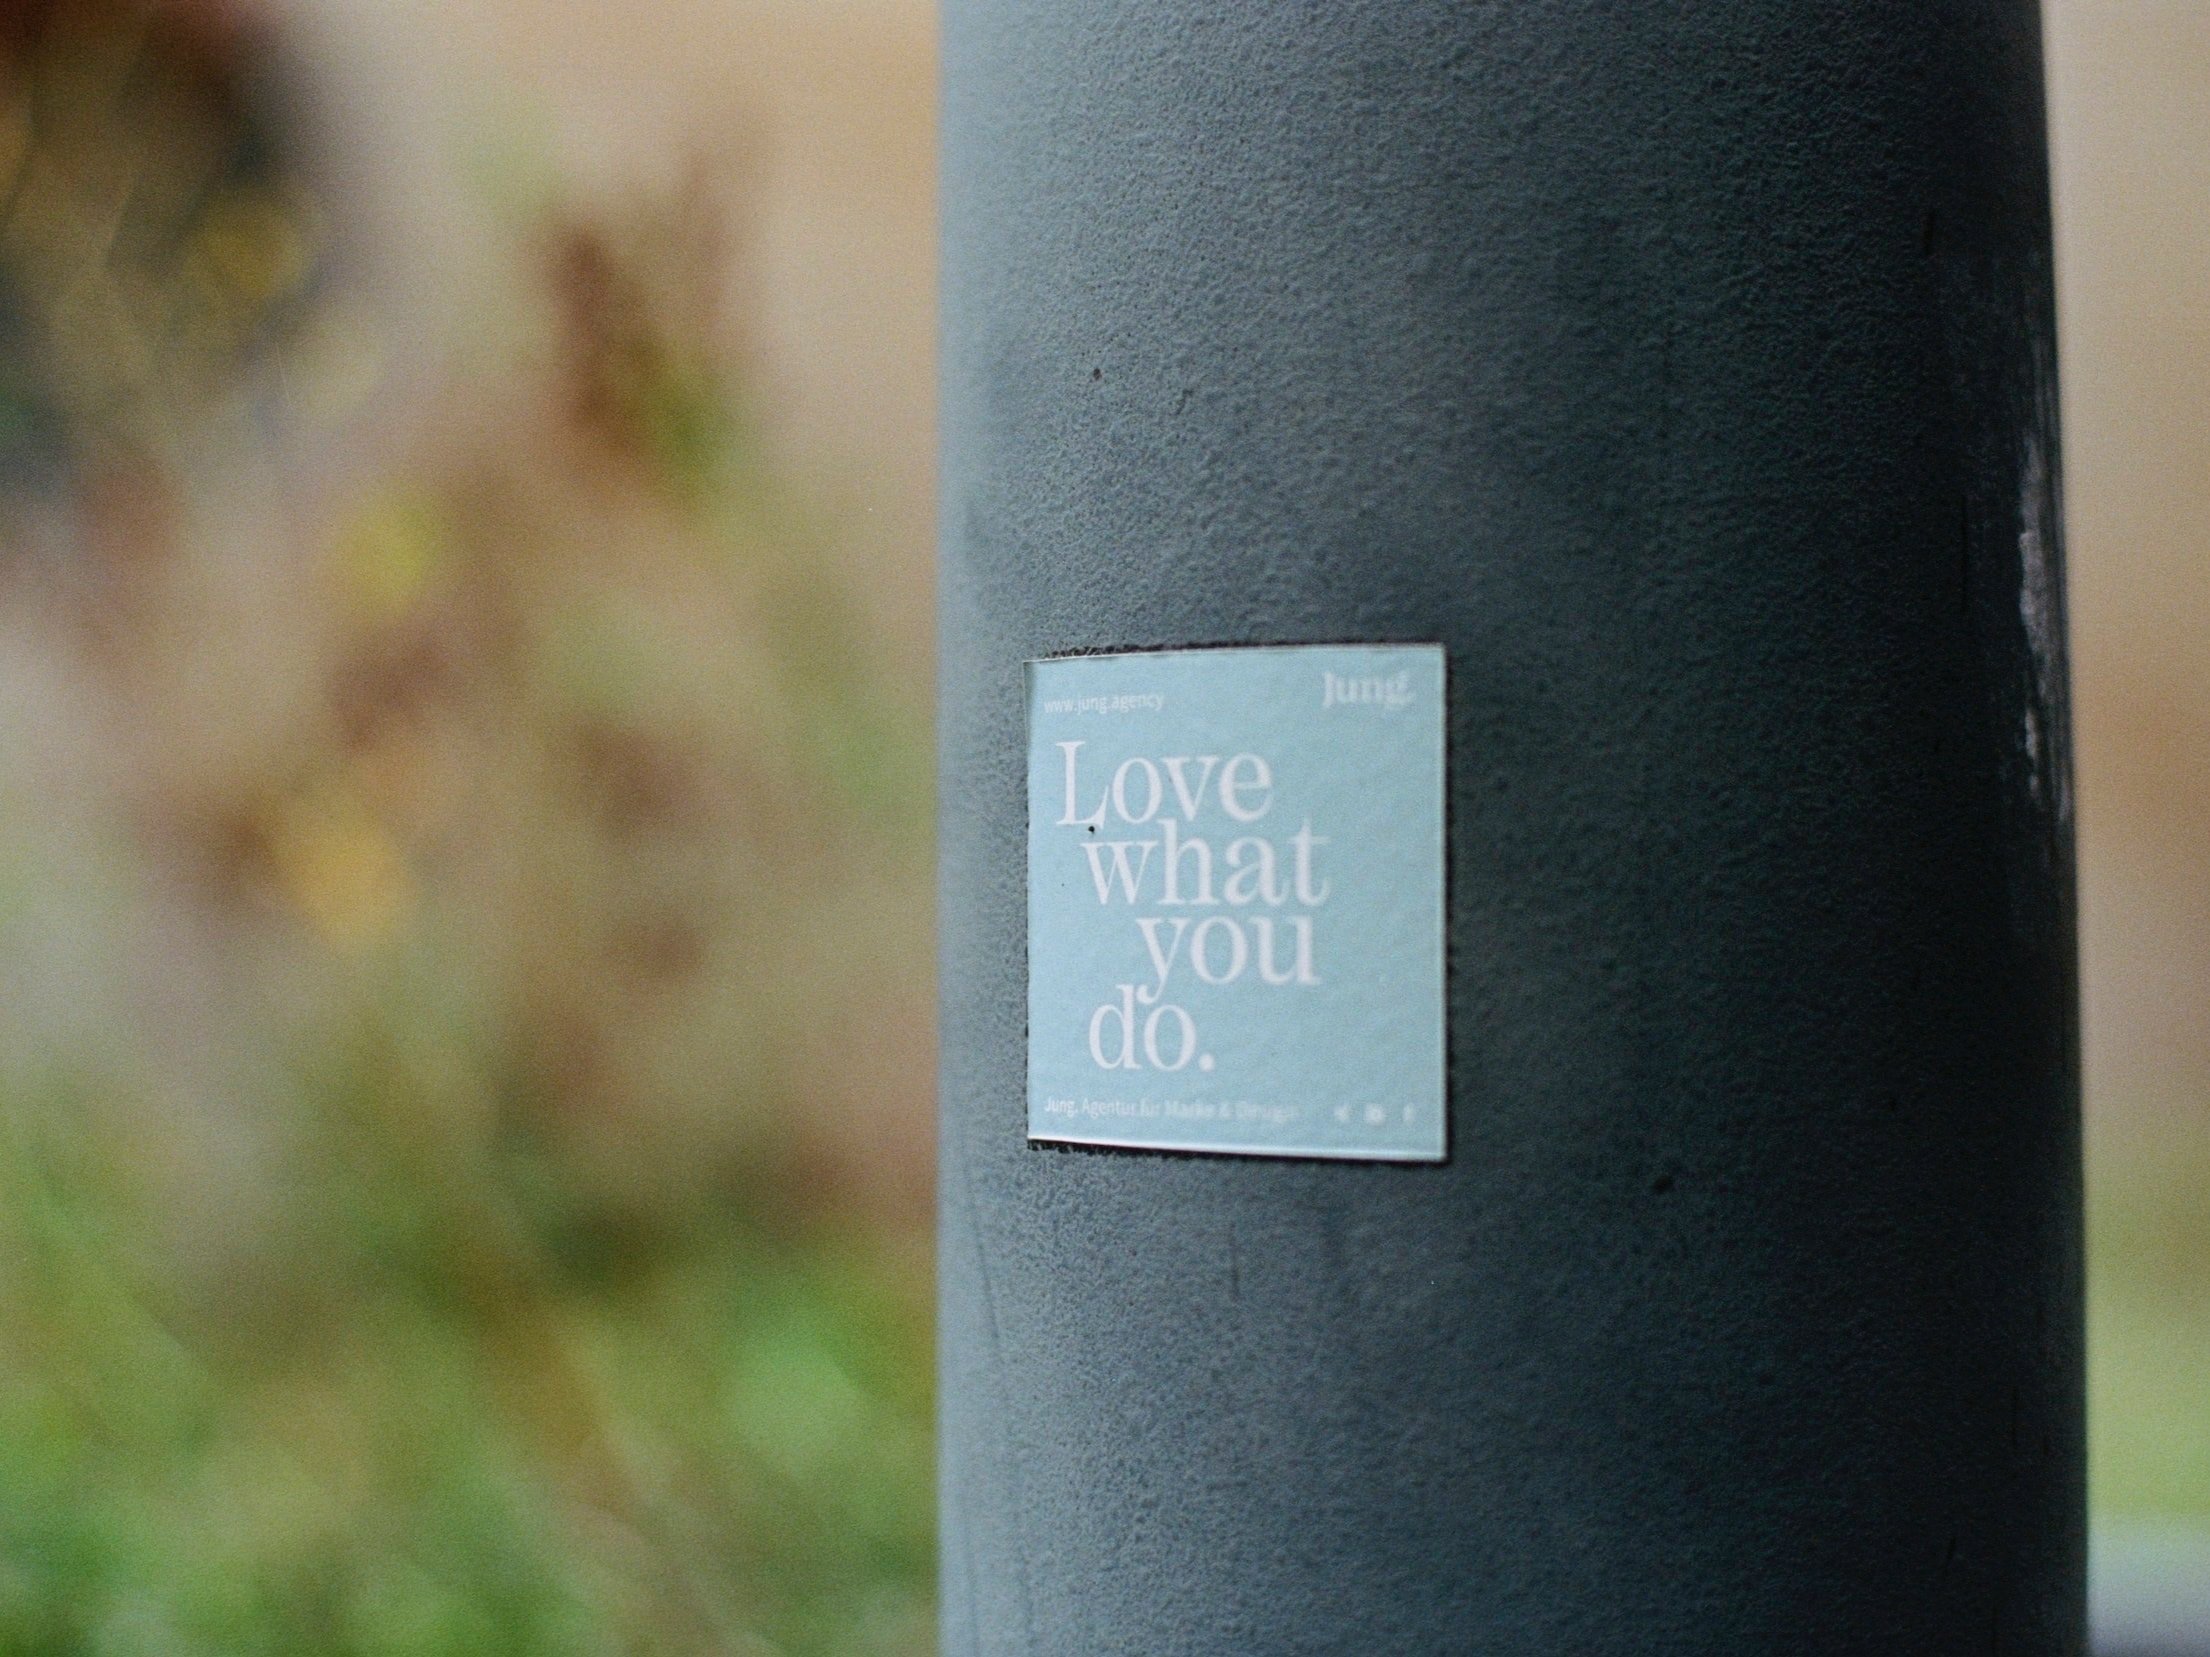 A sticker reading "Love what you do" is affixed to a painted concrete post.